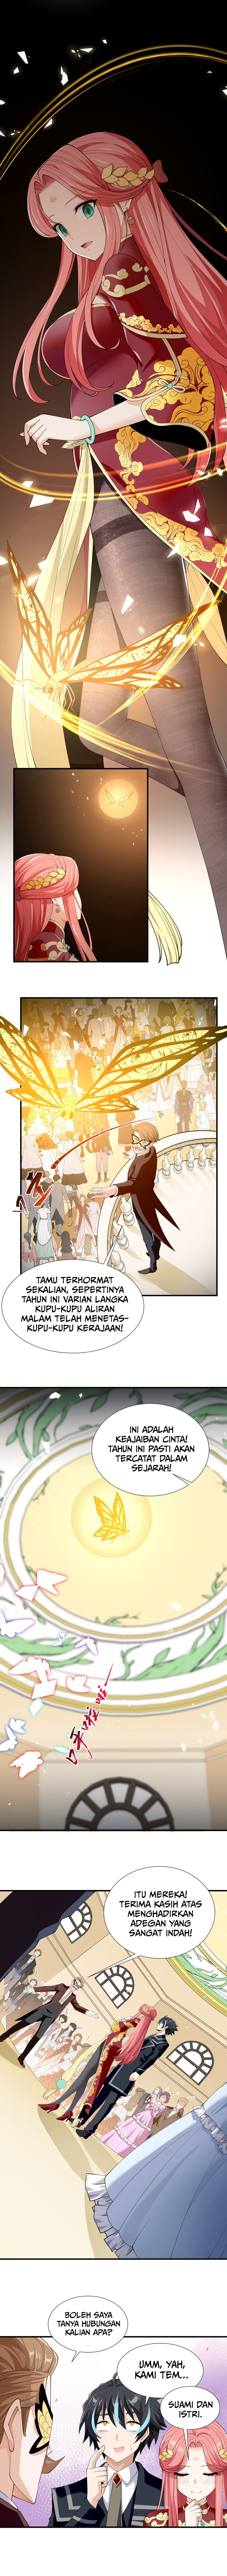 Dilarang COPAS - situs resmi www.mangacanblog.com - Komik little tyrant doesnt want to meet with a bad end 034 - chapter 34 35 Indonesia little tyrant doesnt want to meet with a bad end 034 - chapter 34 Terbaru 5|Baca Manga Komik Indonesia|Mangacan